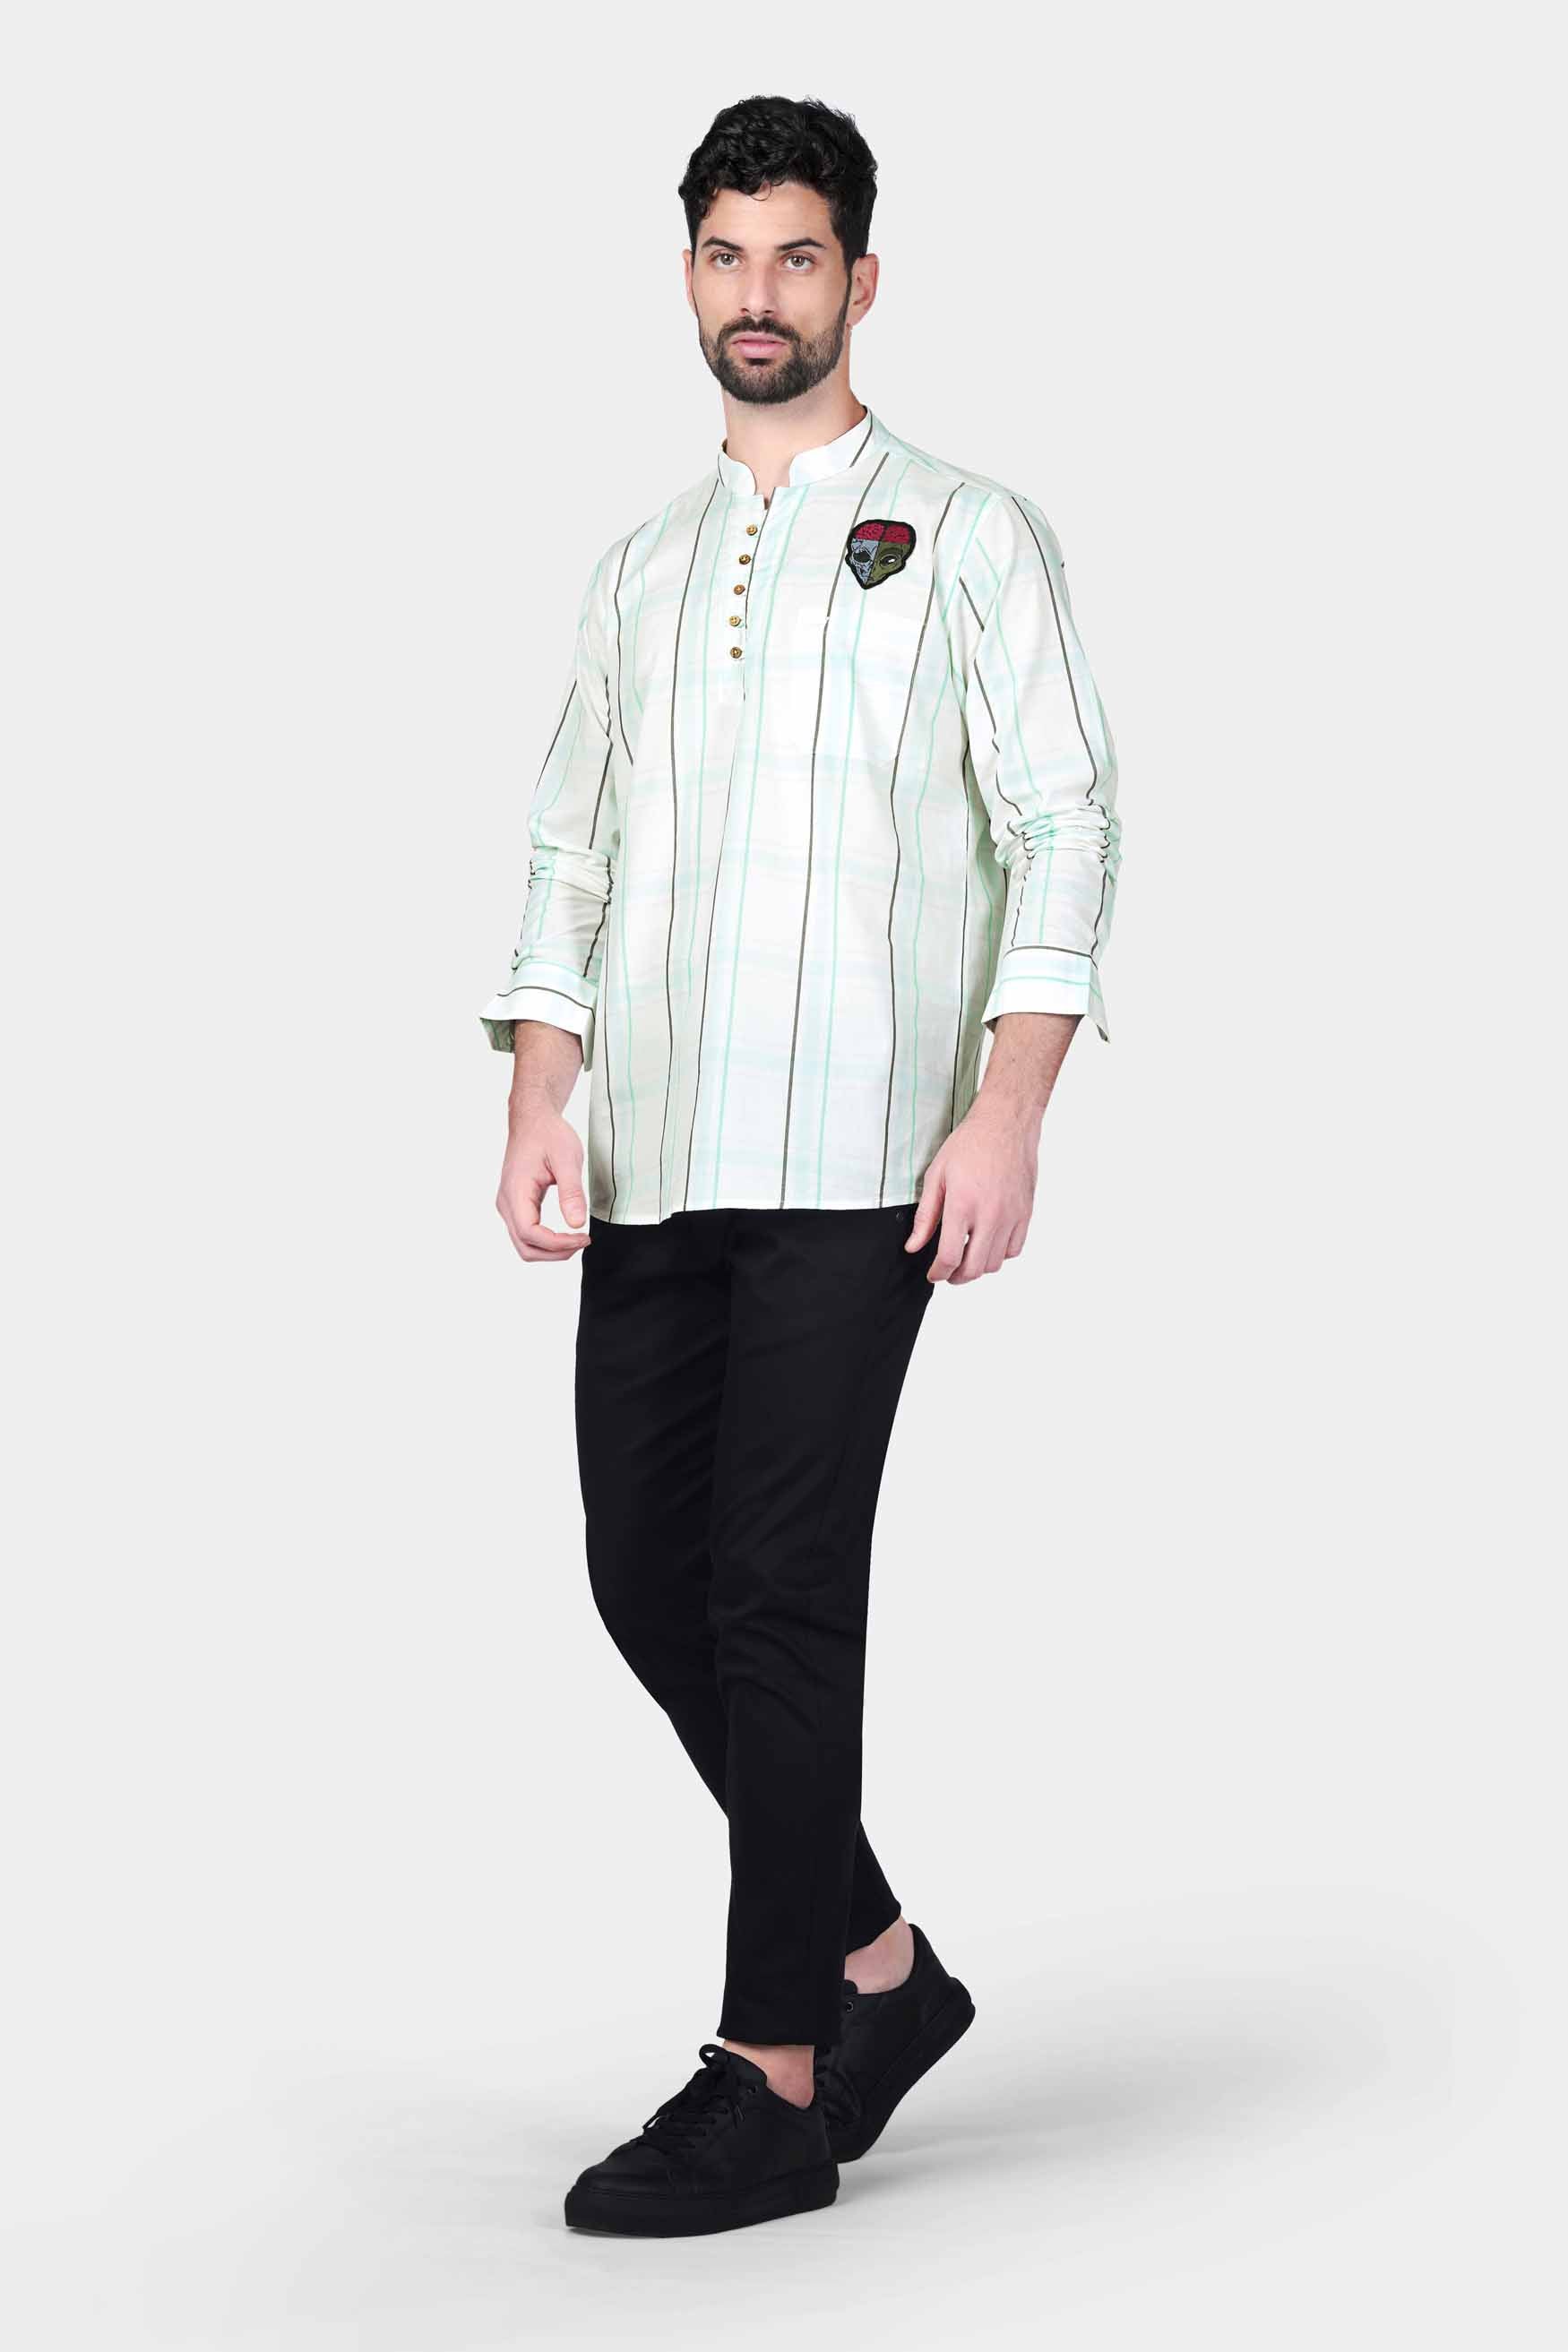 Bright White with Cruise Green and Iridium Gray Striped with Alien Patchwork Premium Cotton Designer Kurta Shirt 8181-KS-E336-38, 8181-KS-E336-H-38, 8181-KS-E336-39, 8181-KS-E336-H-39, 8181-KS-E336-40, 8181-KS-E336-H-40, 8181-KS-E336-42, 8181-KS-E336-H-42, 8181-KS-E336-44, 8181-KS-E336-H-44, 8181-KS-E336-46, 8181-KS-E336-H-46, 8181-KS-E336-48, 8181-KS-E336-H-48, 8181-KS-E336-50, 8181-KS-E336-H-50, 8181-KS-E336-52, 8181-KS-E336-H-52